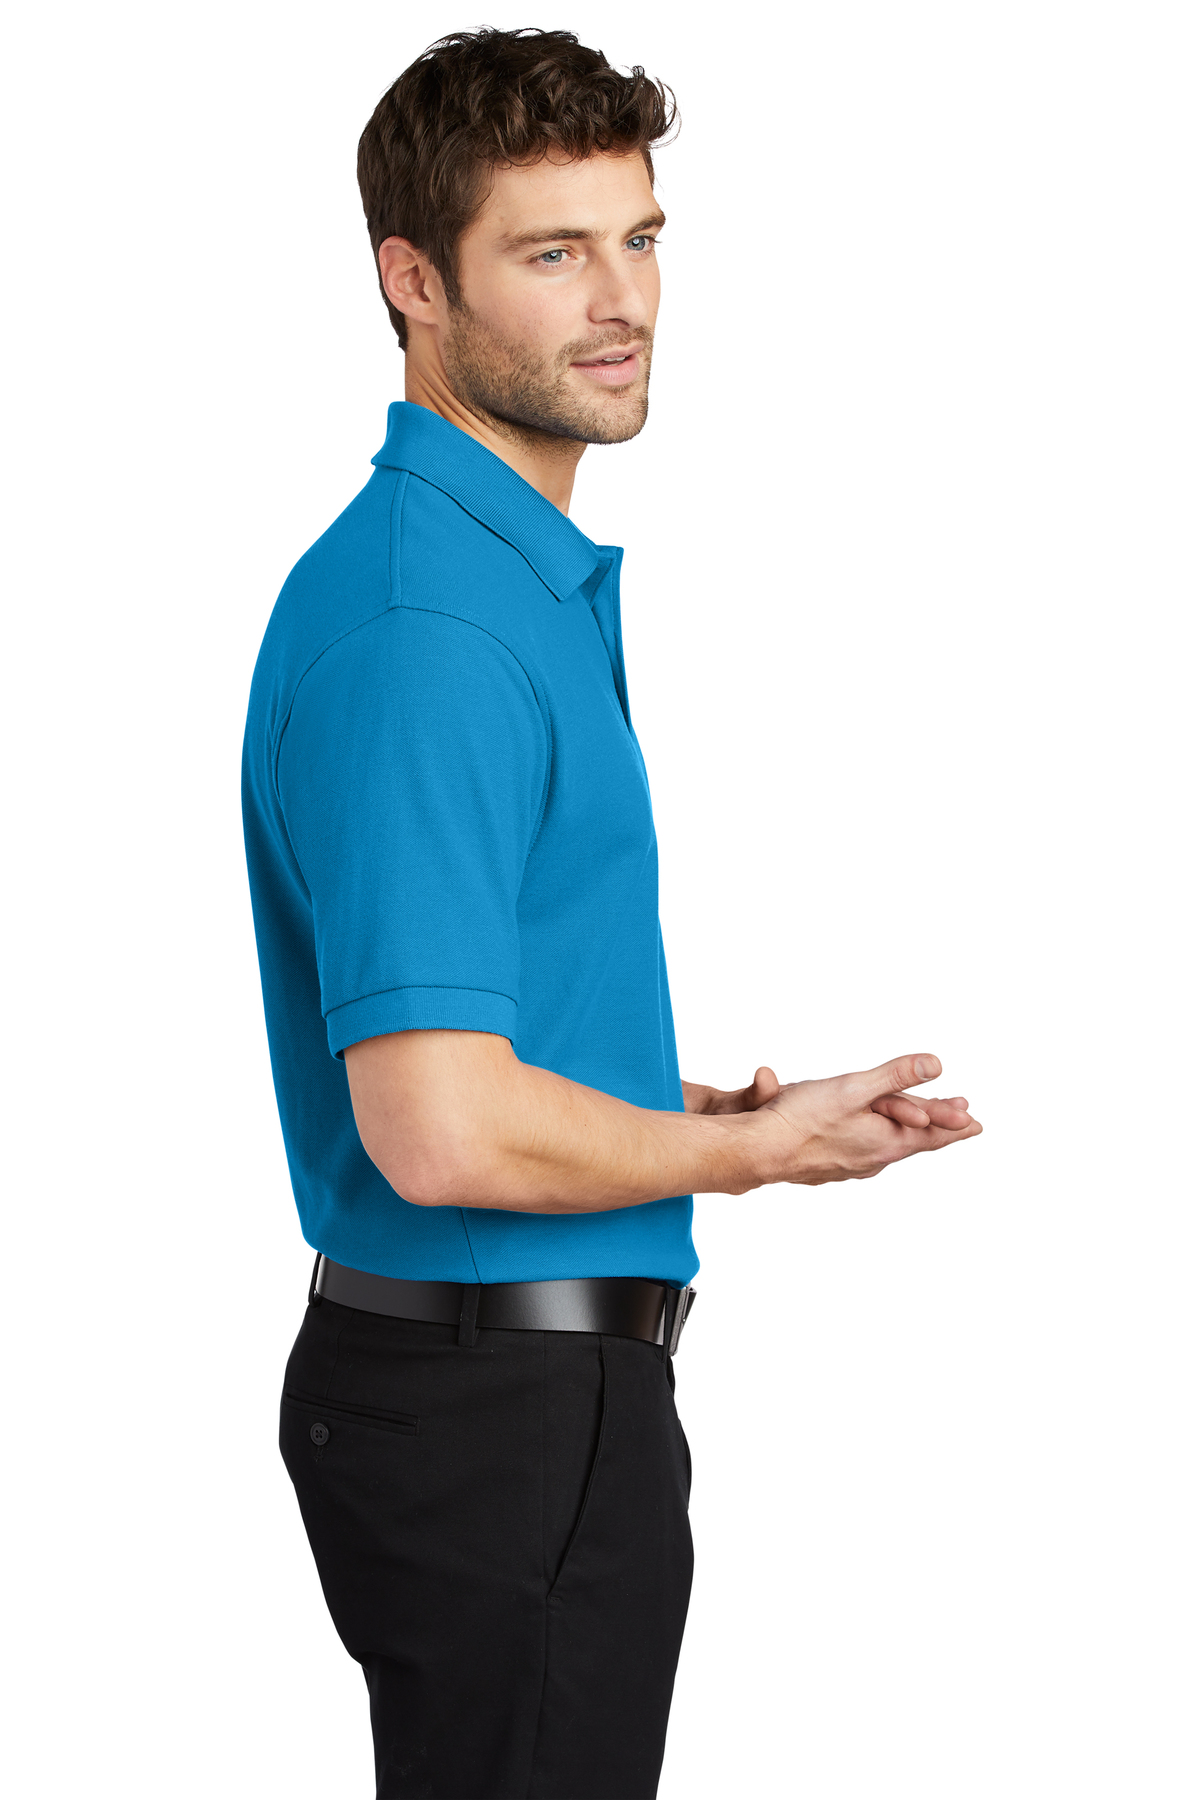 Port Authority Silk Touch™ Polo | Product | Port Authority